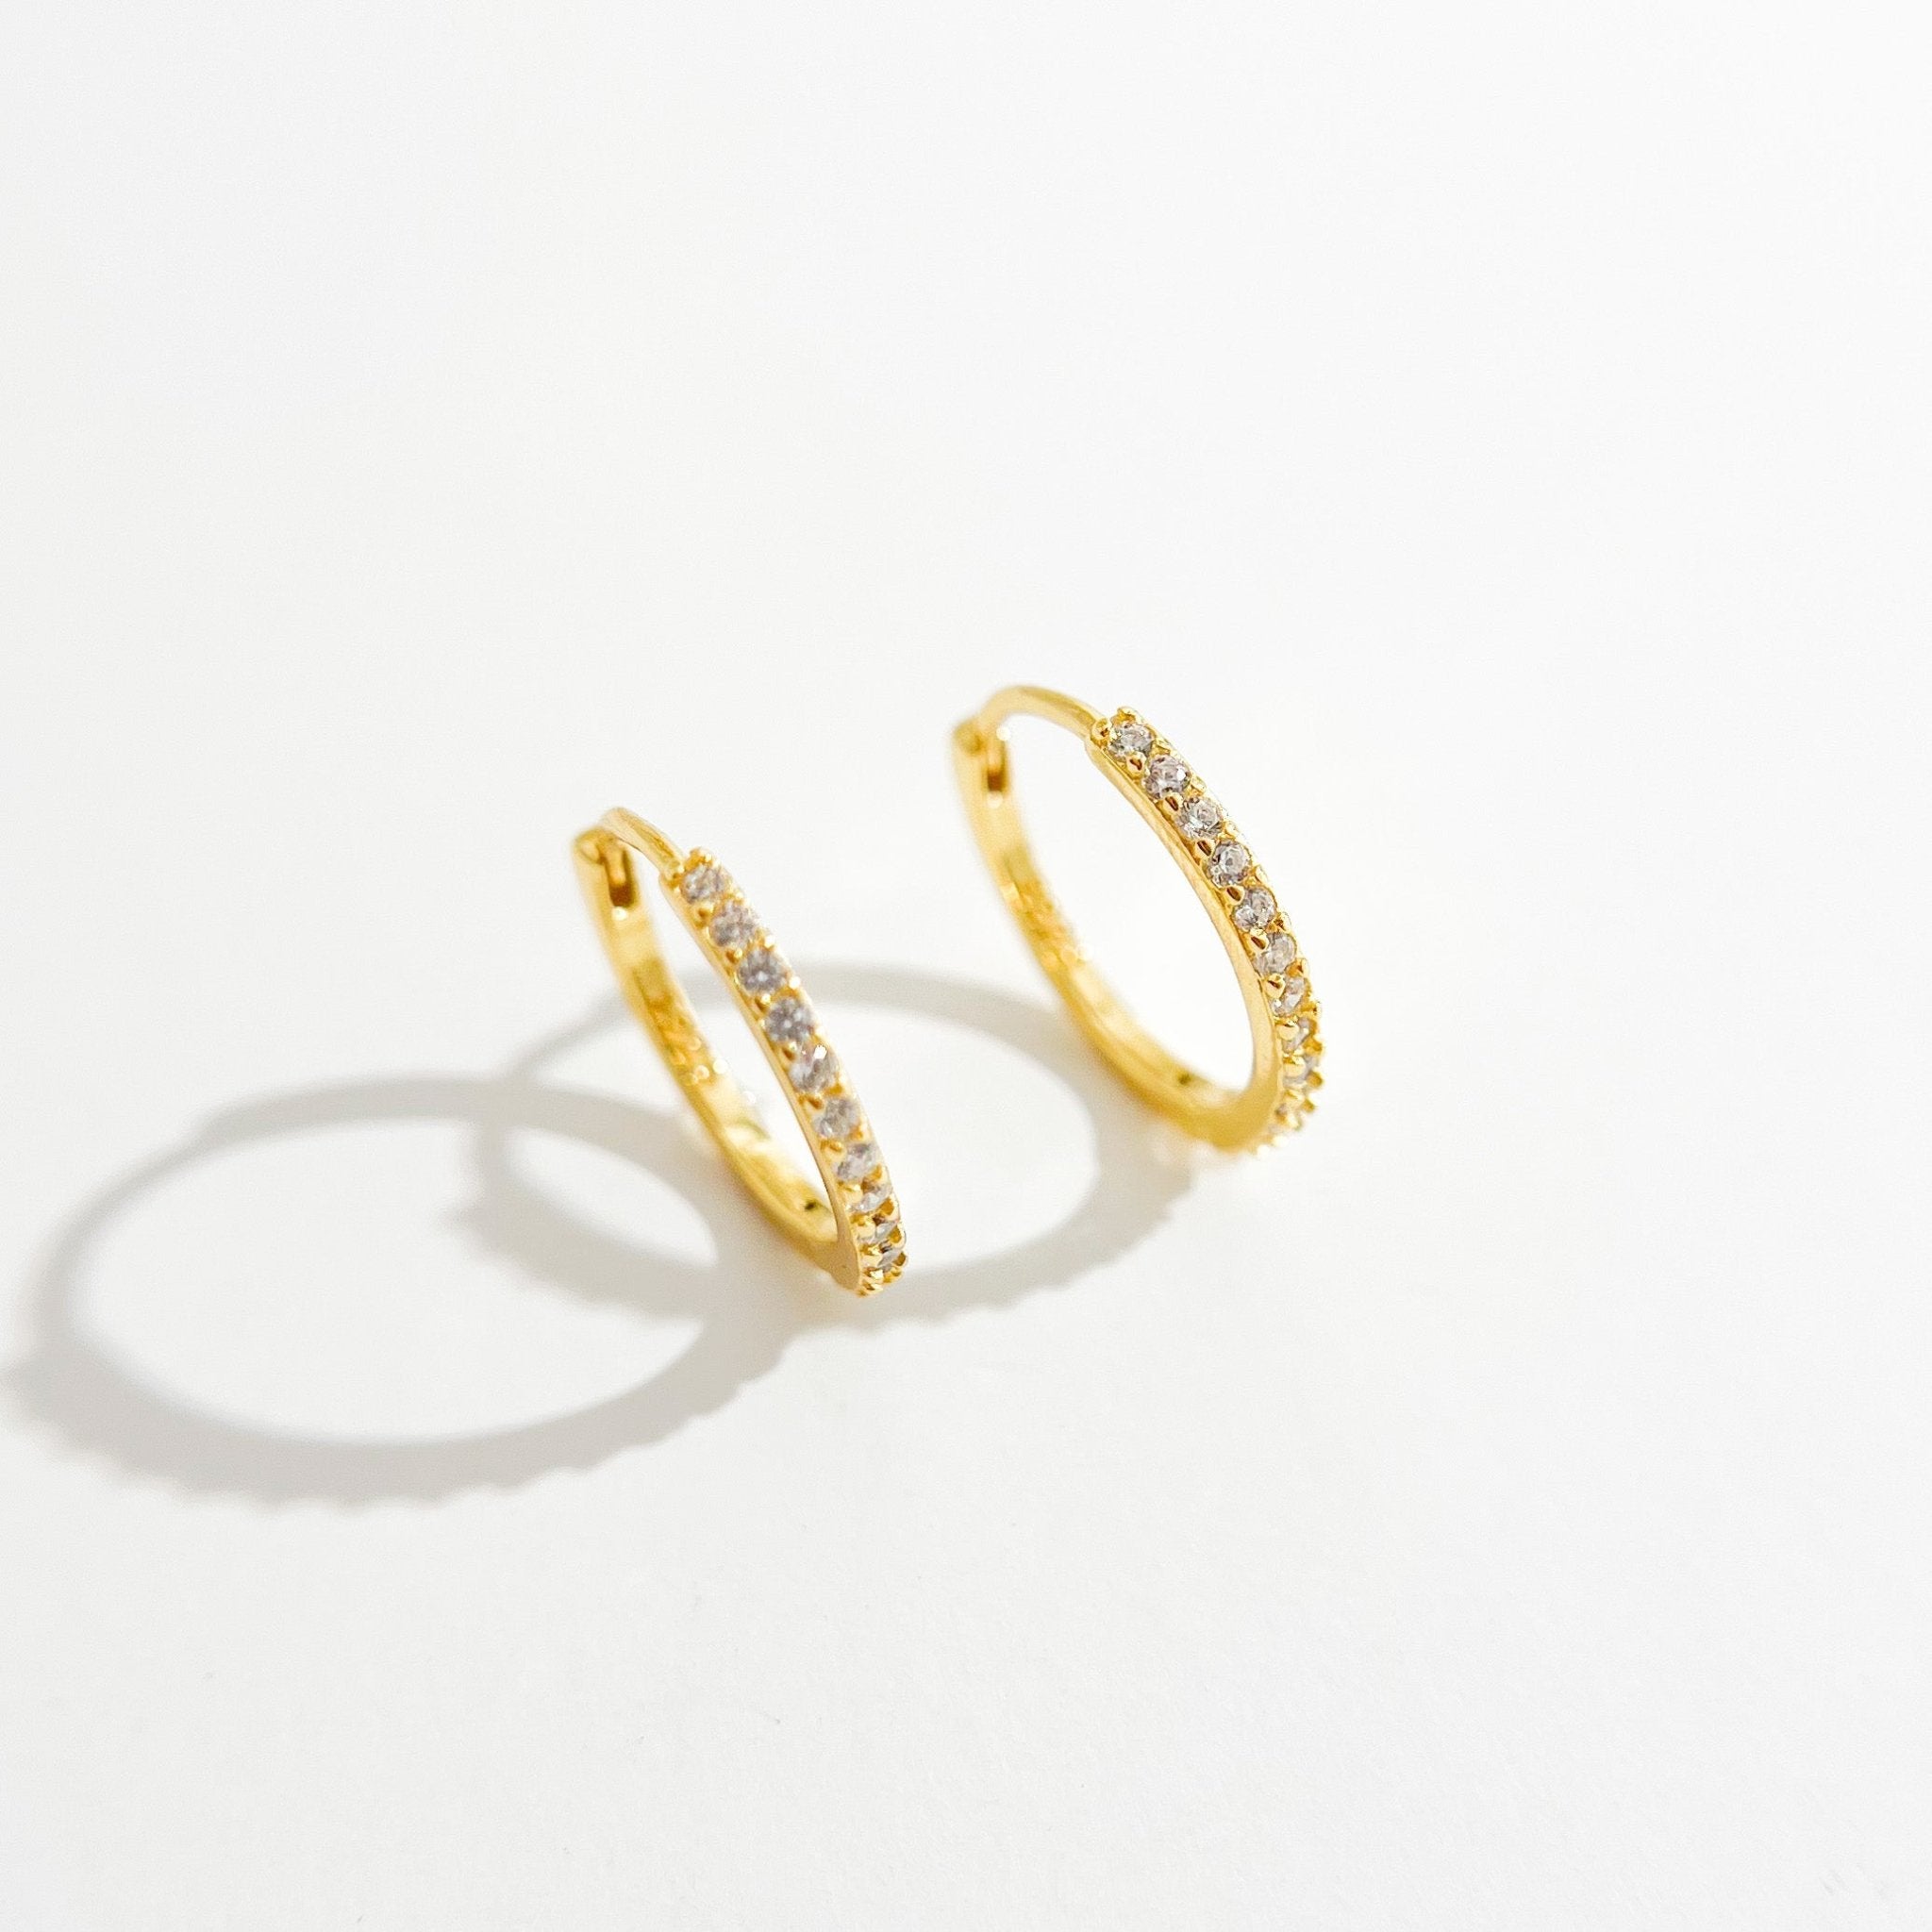 Adeline Hoops in Gold - Flaire & Co.